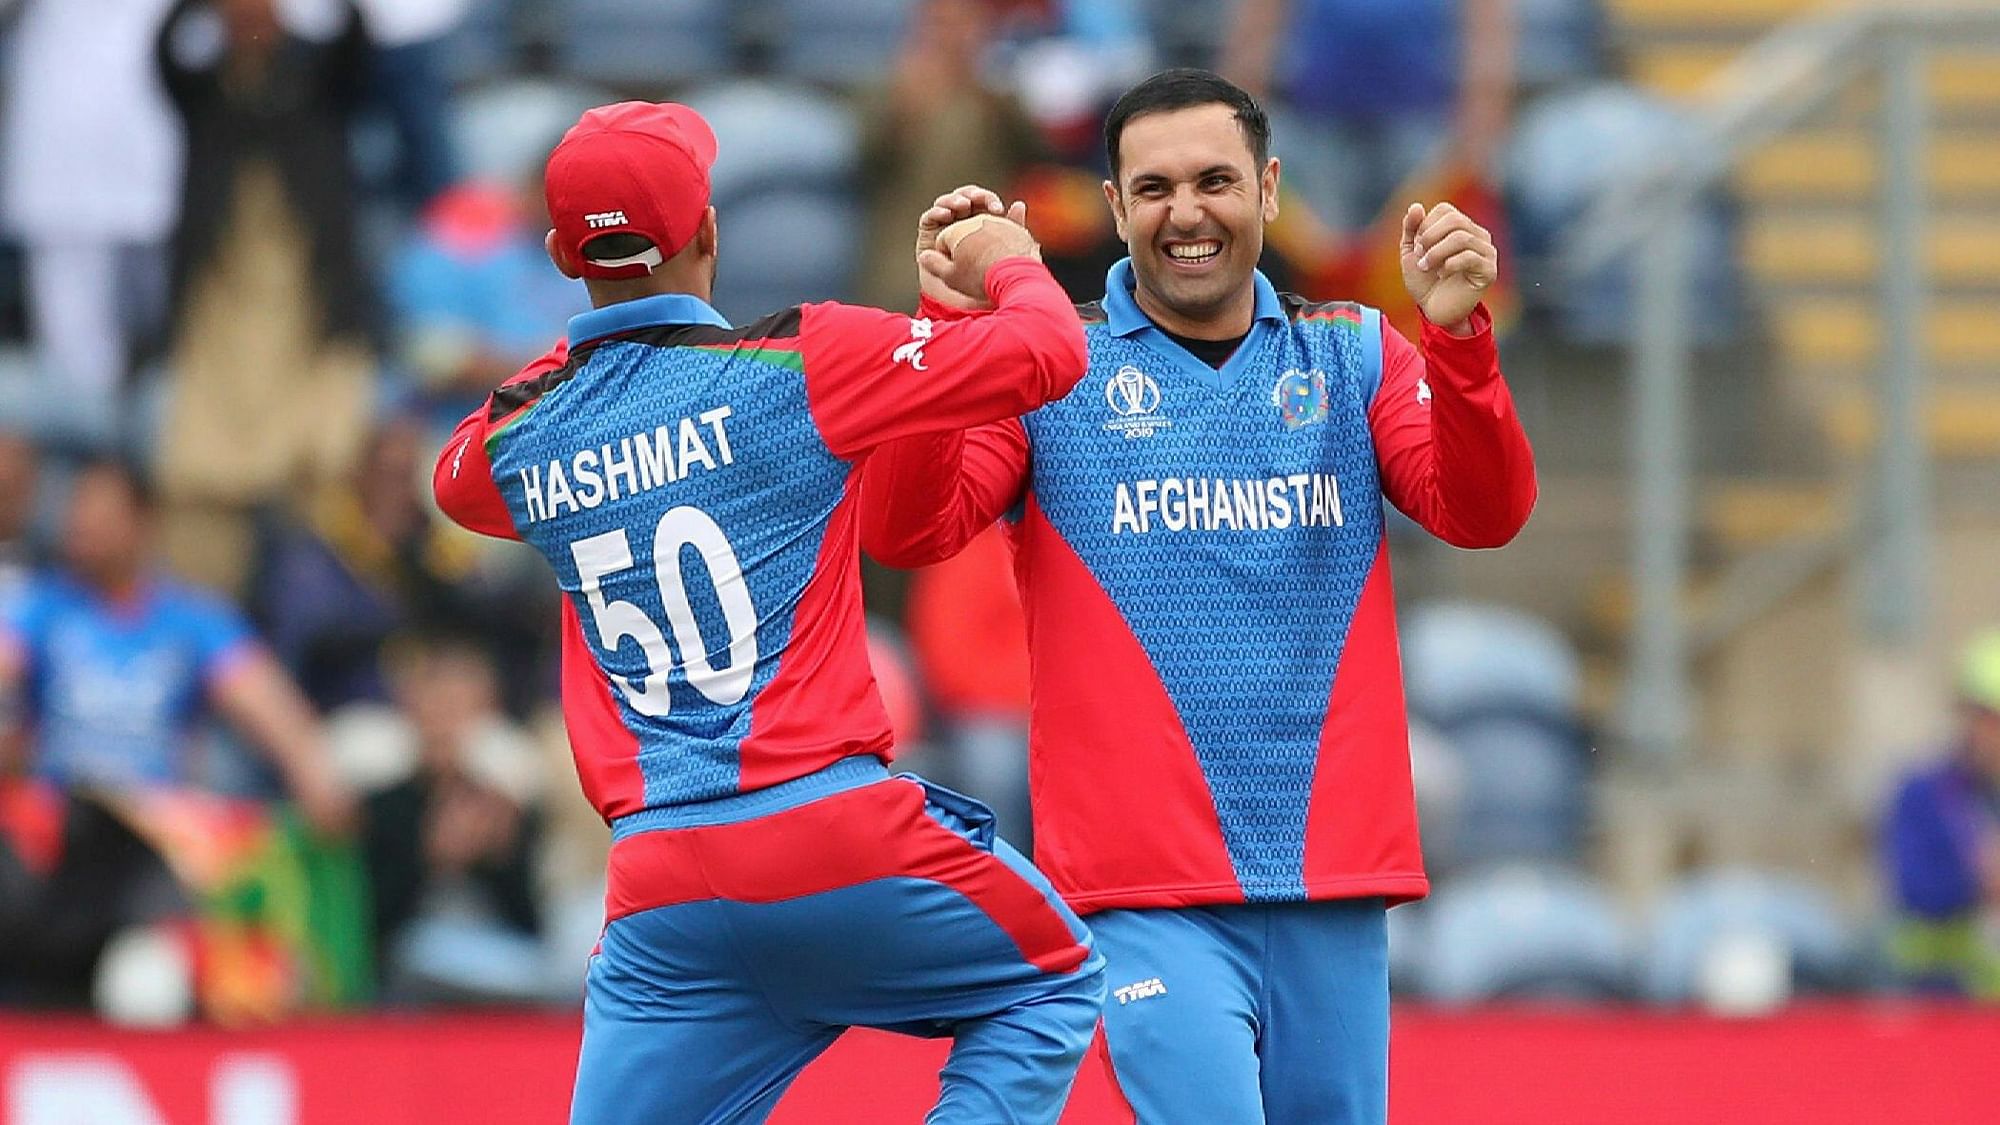 Nabi took a total of four wickets before the game was interrupted by rain.